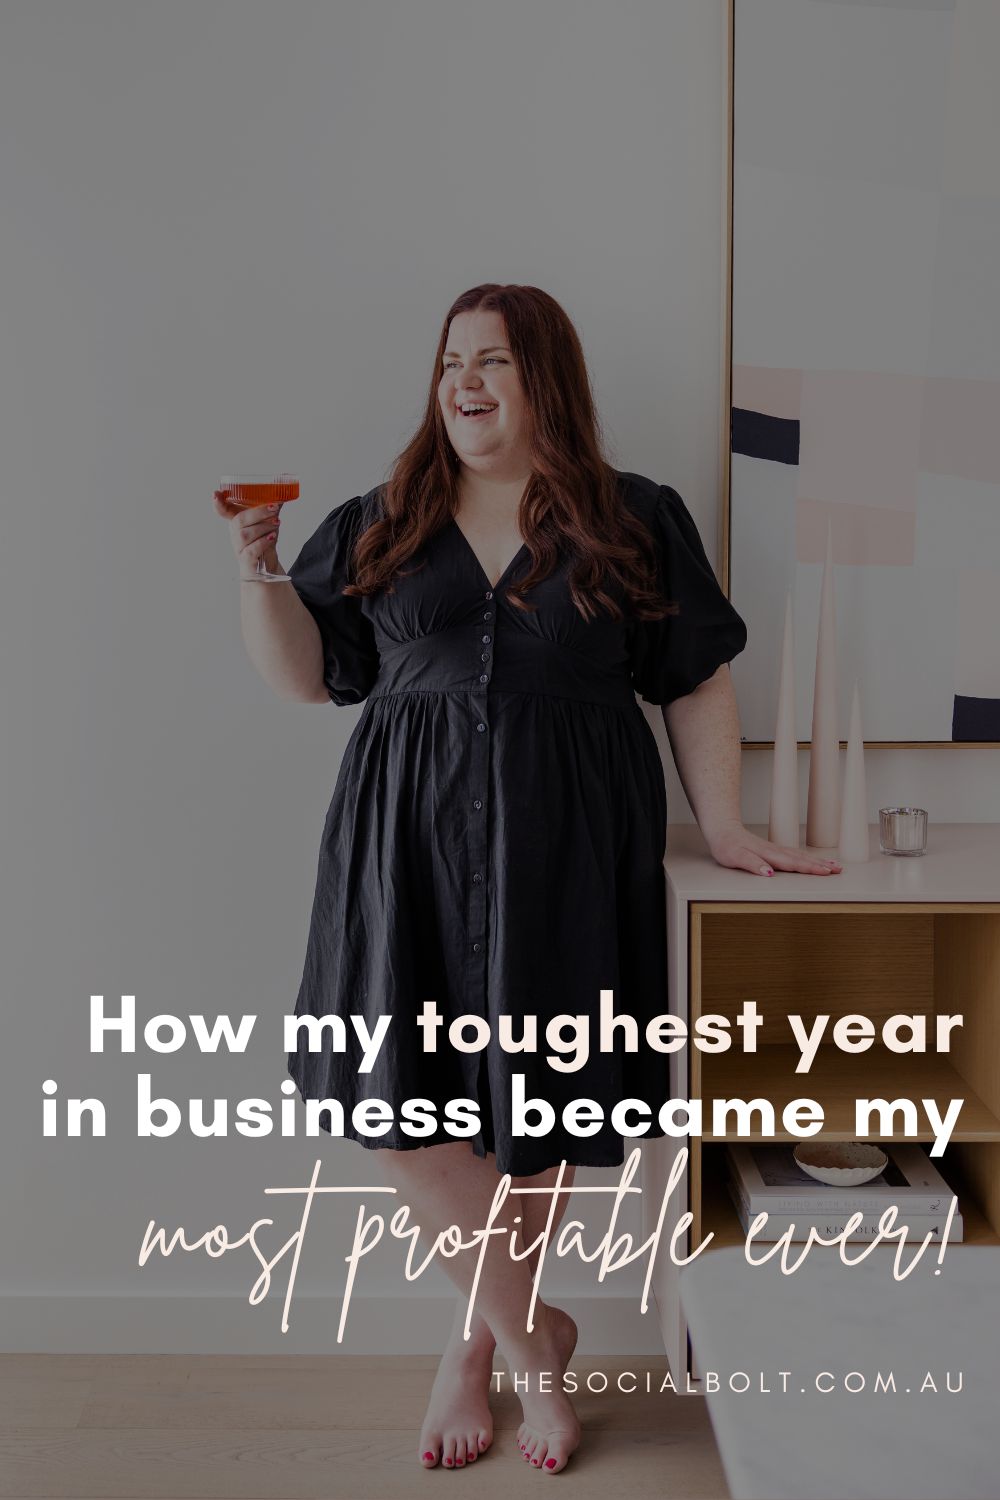 How My Toughest Year In Business Became My Most Profitable To Date